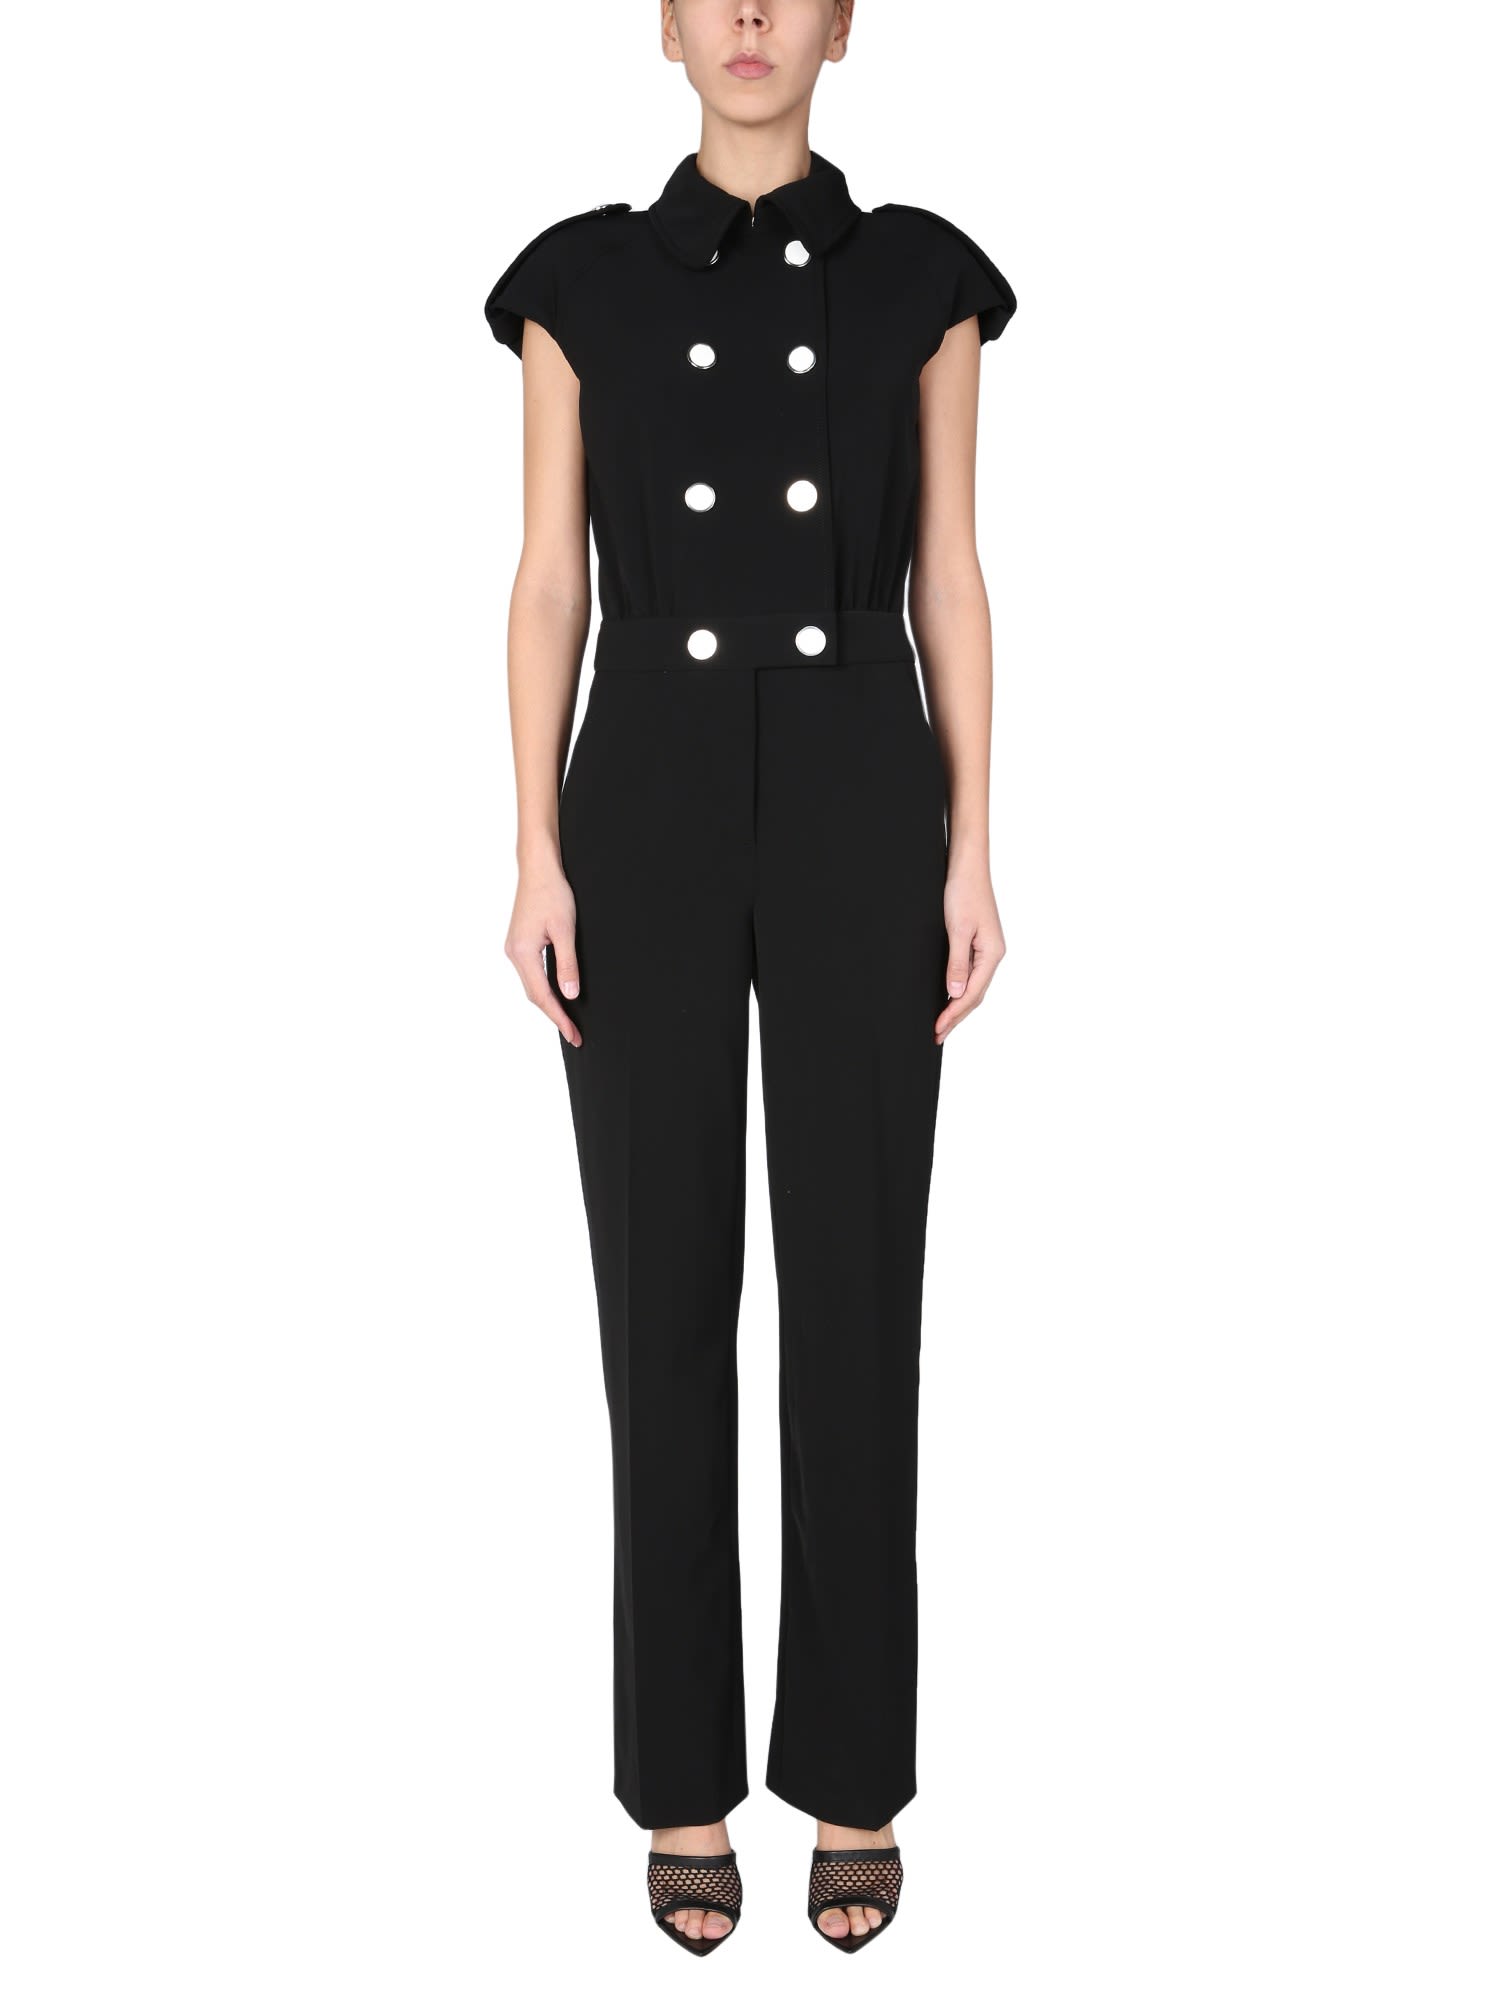 Boutique Moschino 60s Chic Tracksuit